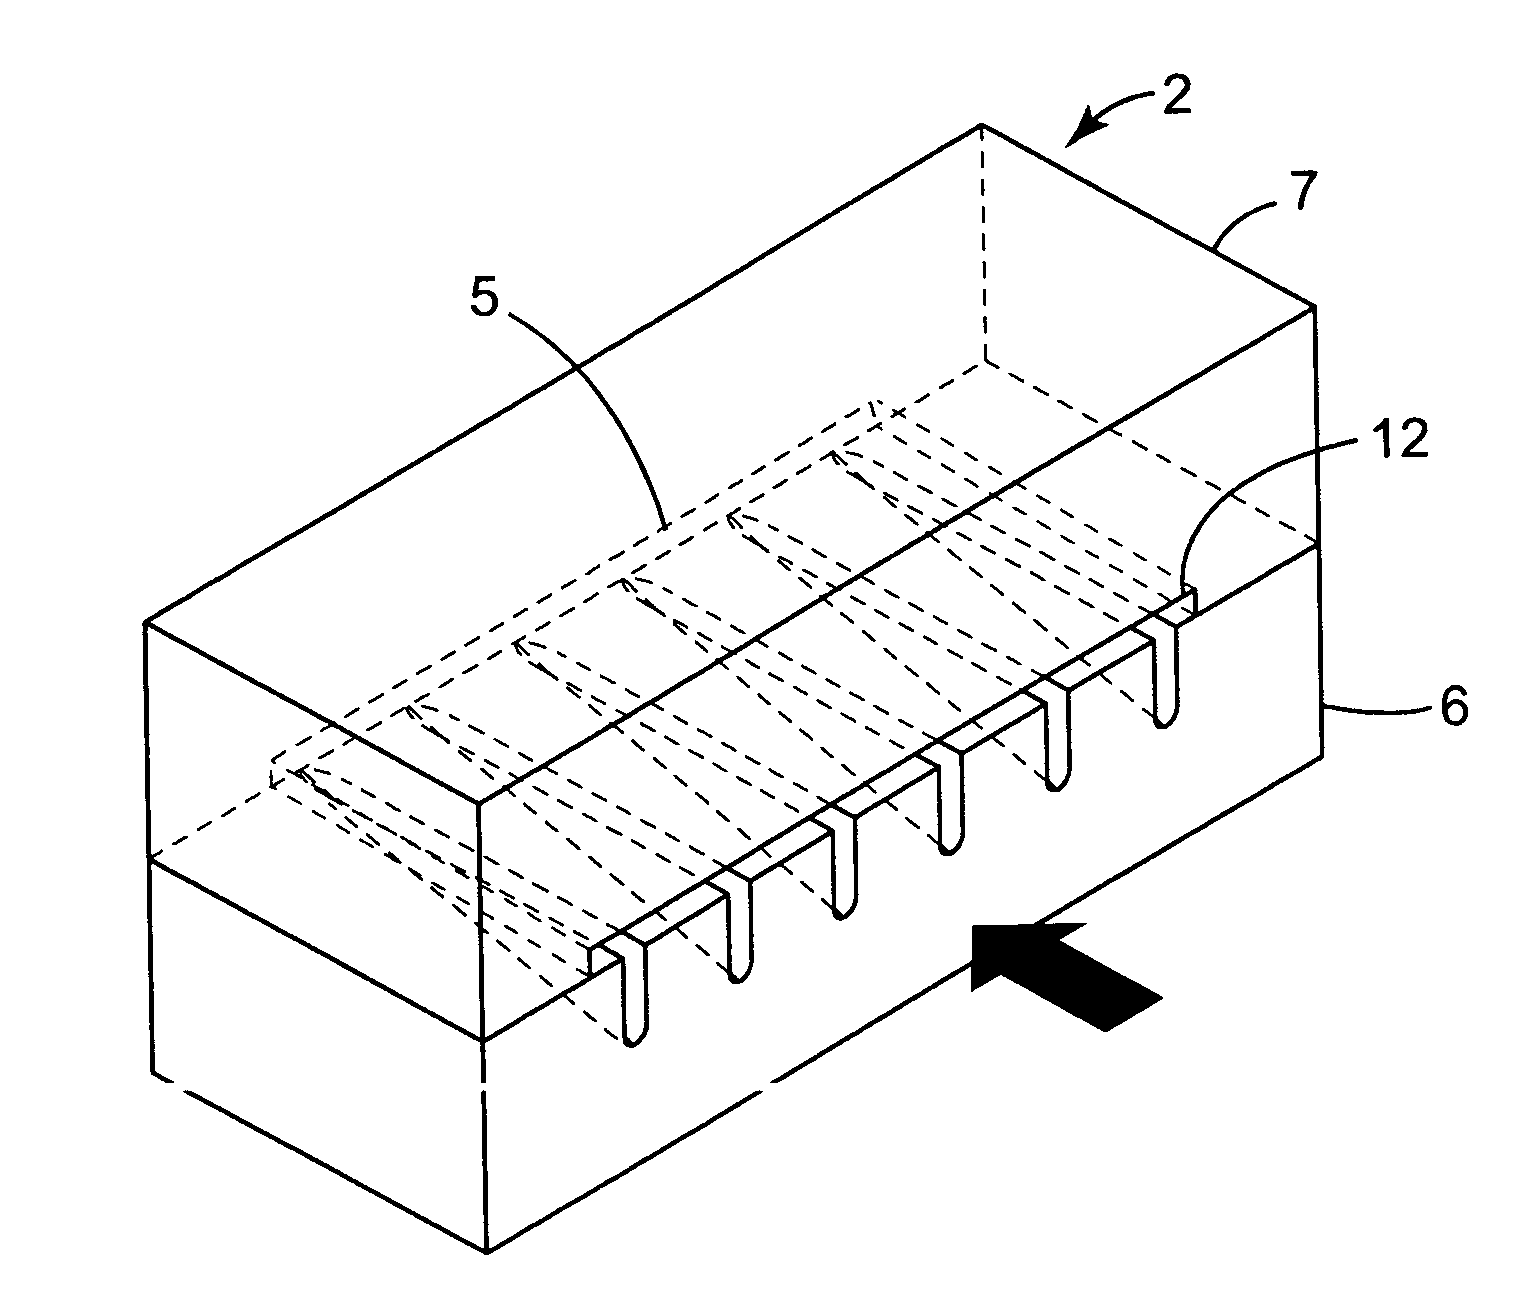 Method of extruding articles